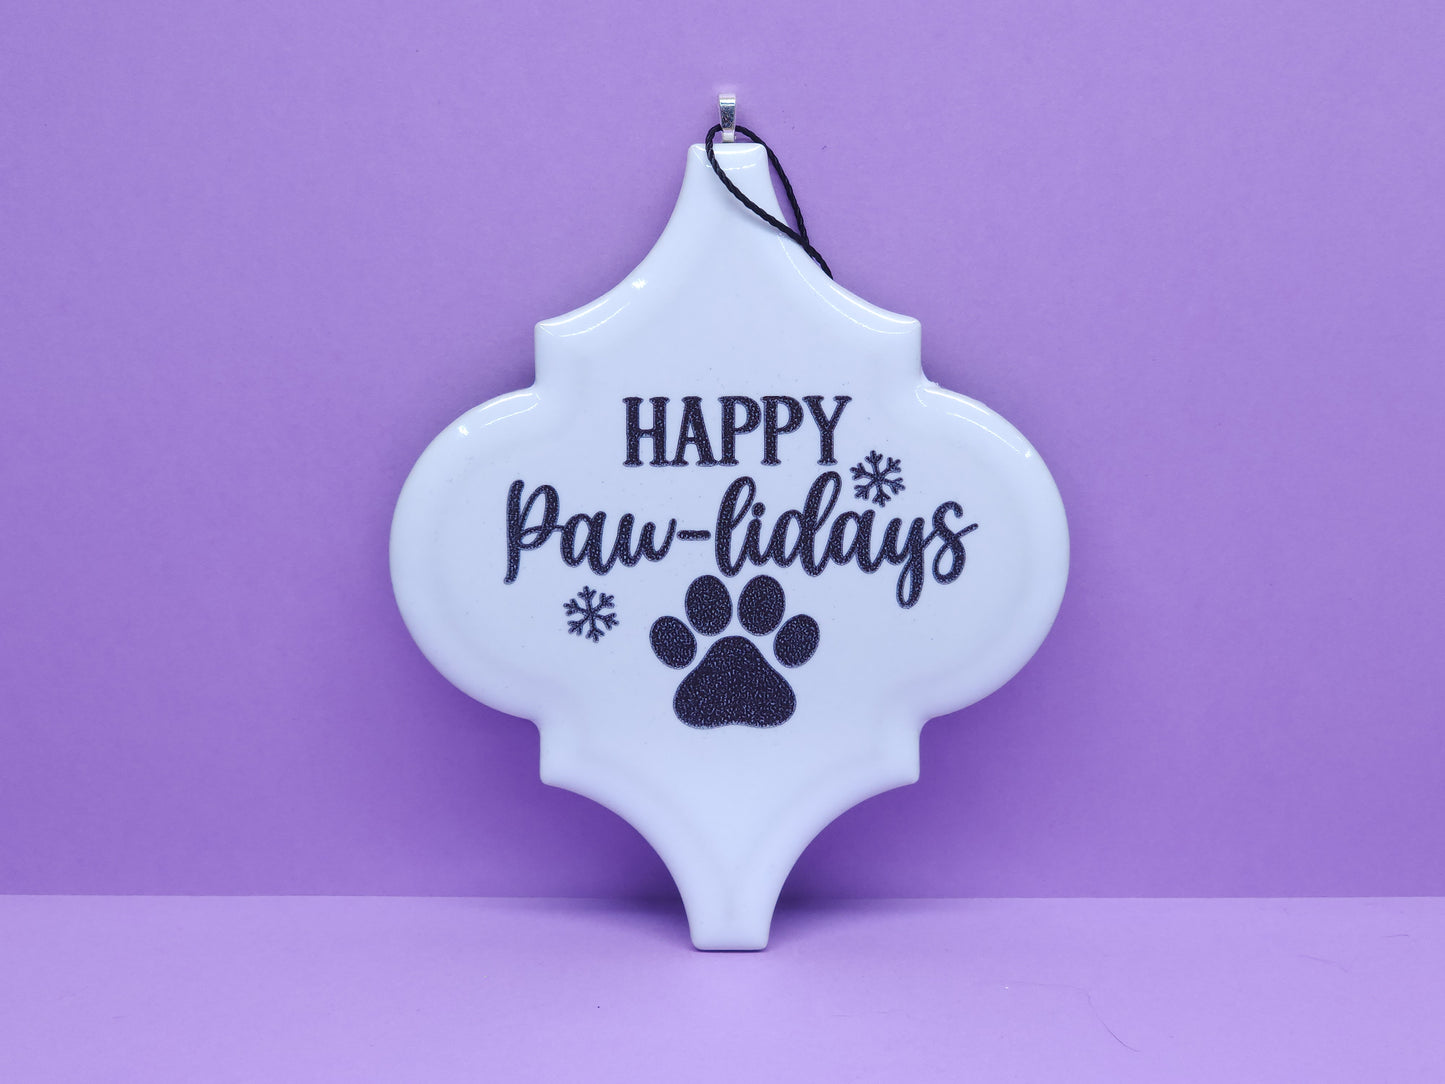 "Happy Paw-lidays" Ink-Filled Arabesque Ornament